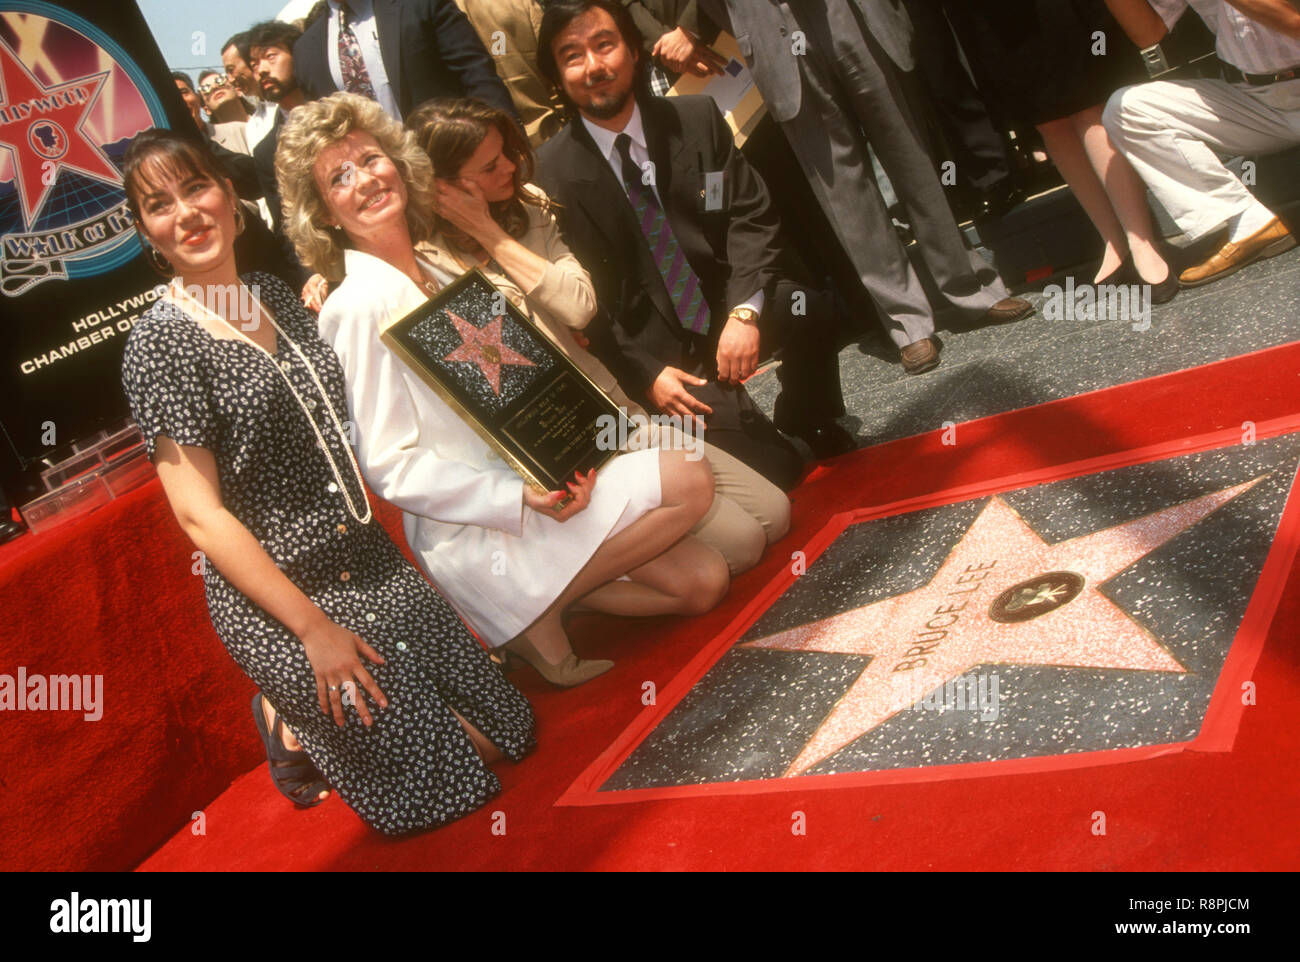 HOLLYWOOD, CA - APRIL 28: Shannon Lee, mother Linda Lee Caldwell, Eliza  Hutton and Robert Lee attend the Hollywood Walk of Fame Ceremony for Bruce  Lee on April 28, 1993 at 6933